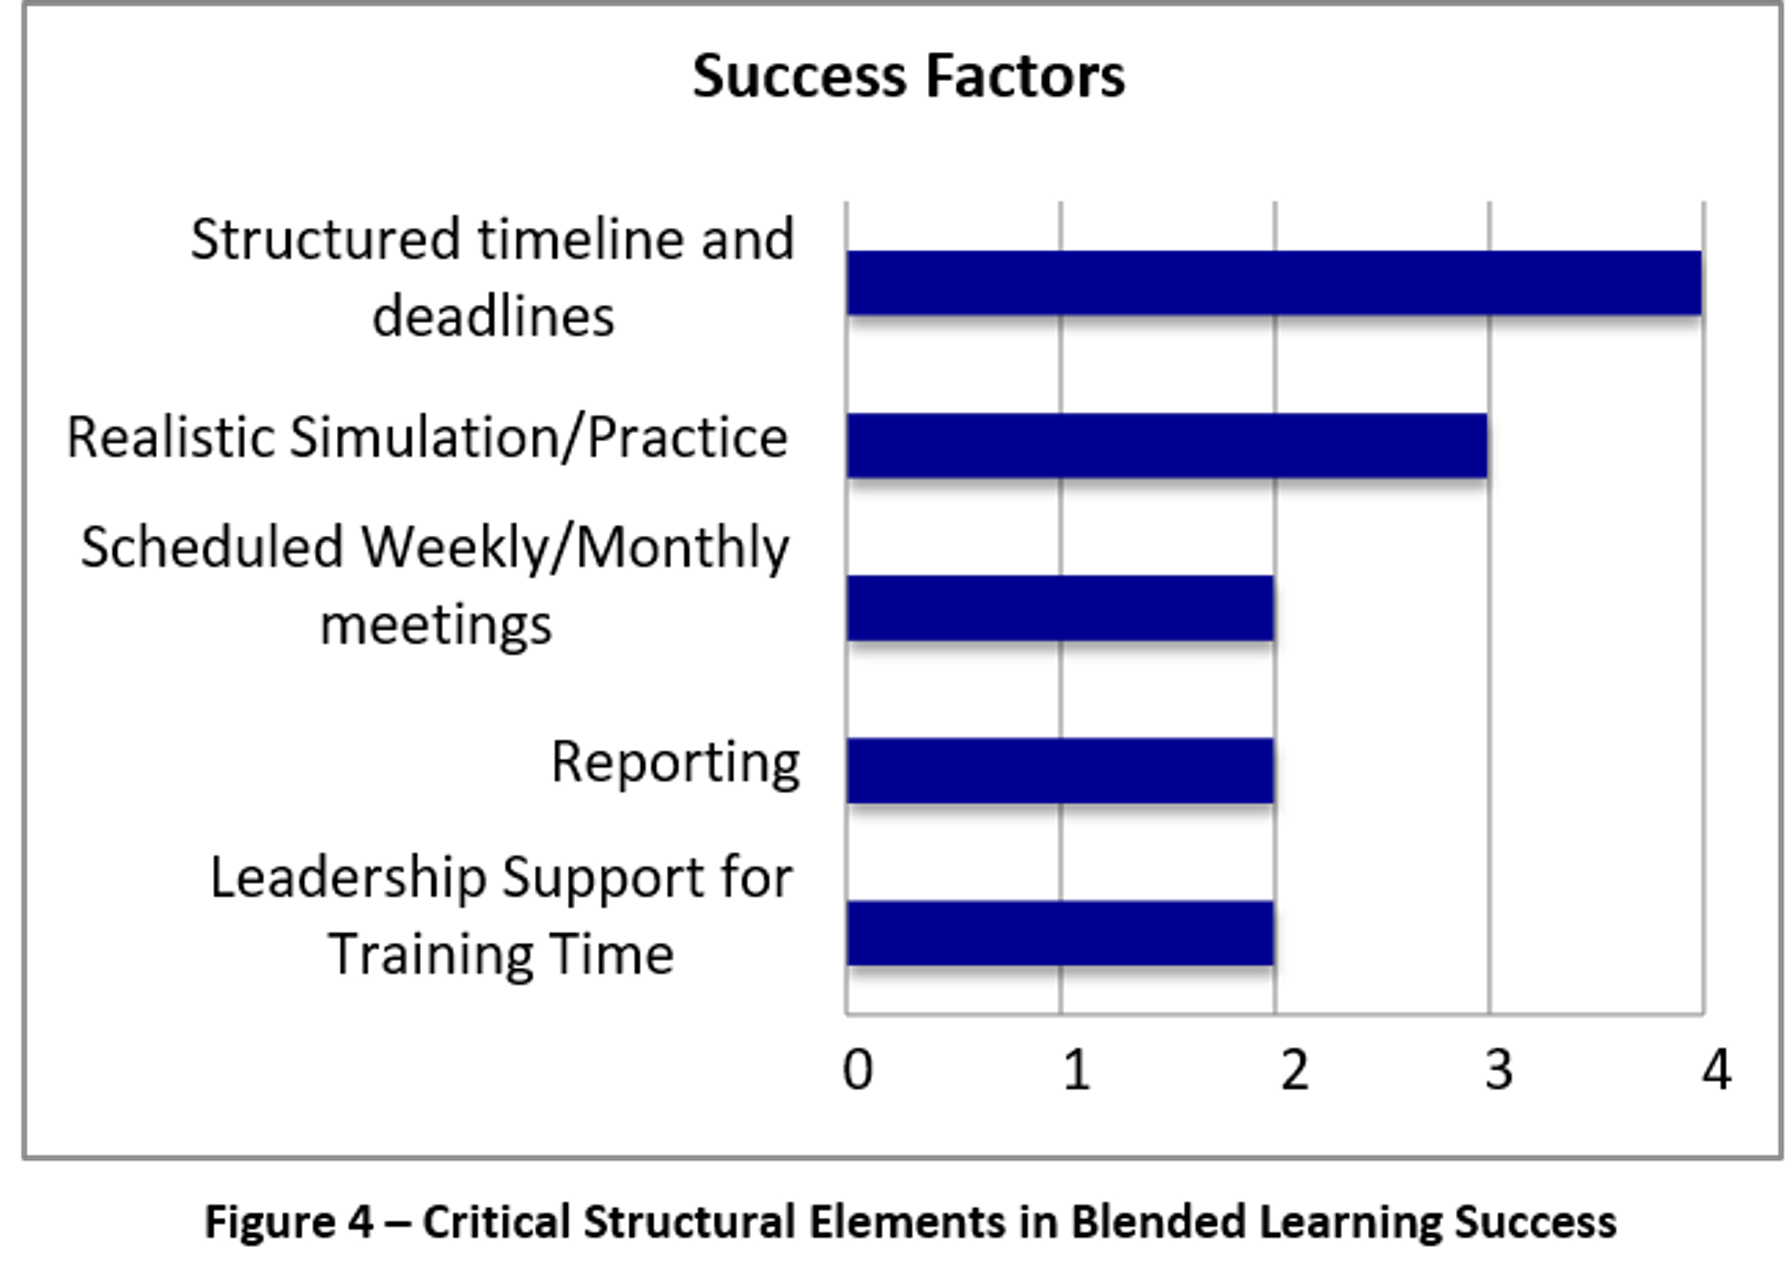 A bar chart titled Critical Structural Elements in Blended Learning Success. The values range from 0 to 4. Structured timeline and deadlines highest at 4. Next is Realistic Simulation and Practice at 3. Scheduled Weekly and Monthly Meetings is a 2. Reporting is a 2. Leadership Support for Training time is a 2.